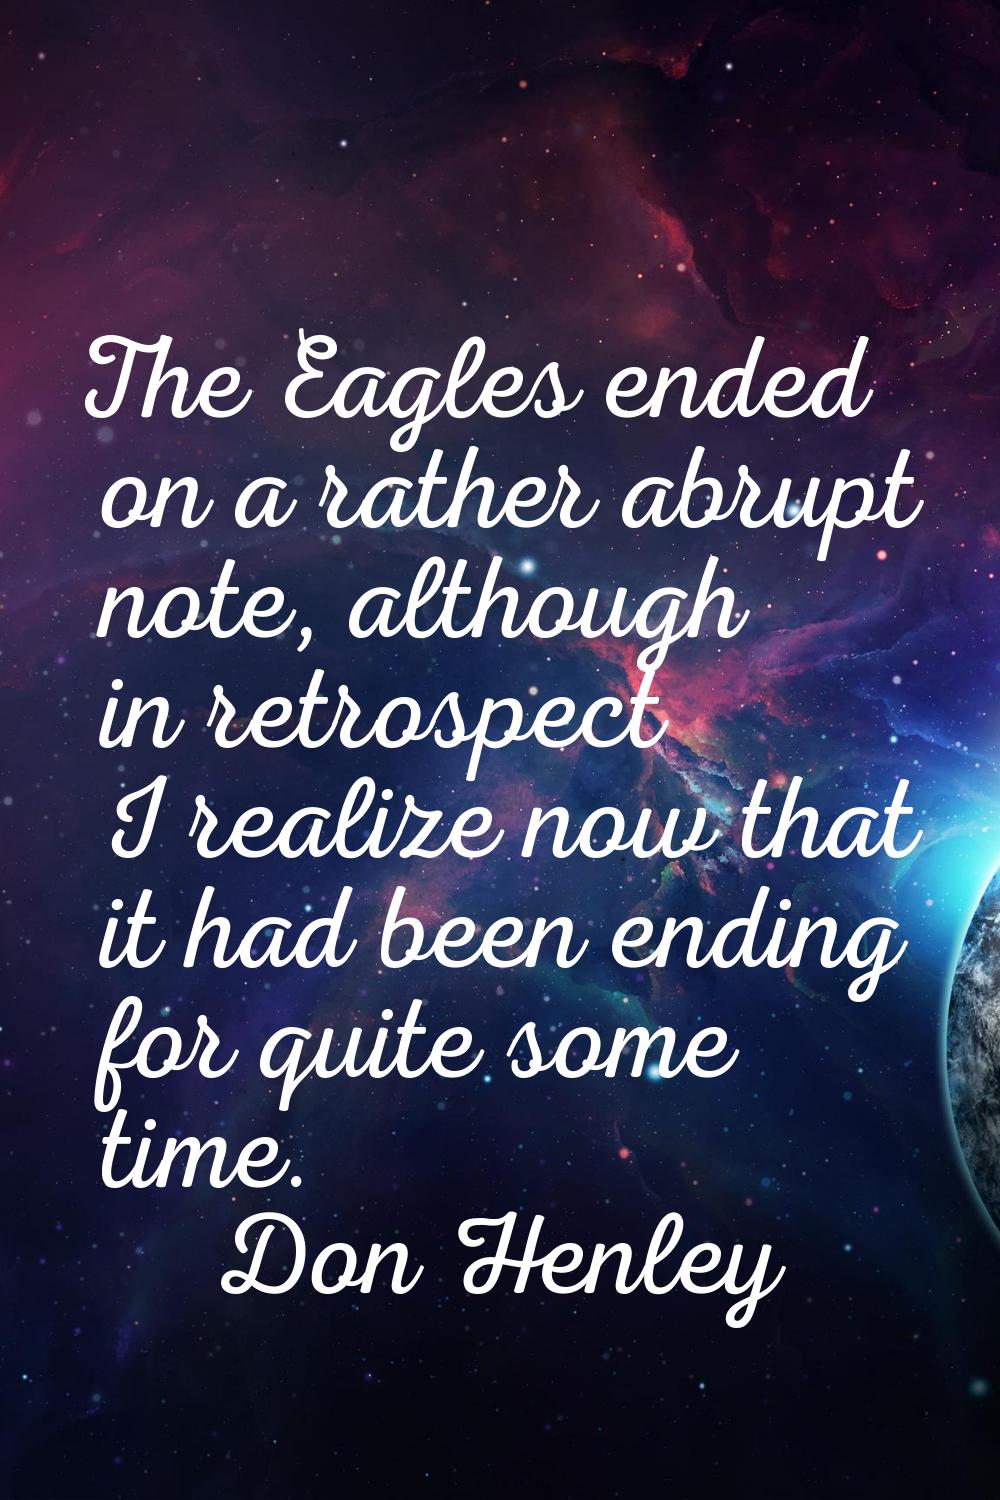 The Eagles ended on a rather abrupt note, although in retrospect I realize now that it had been end